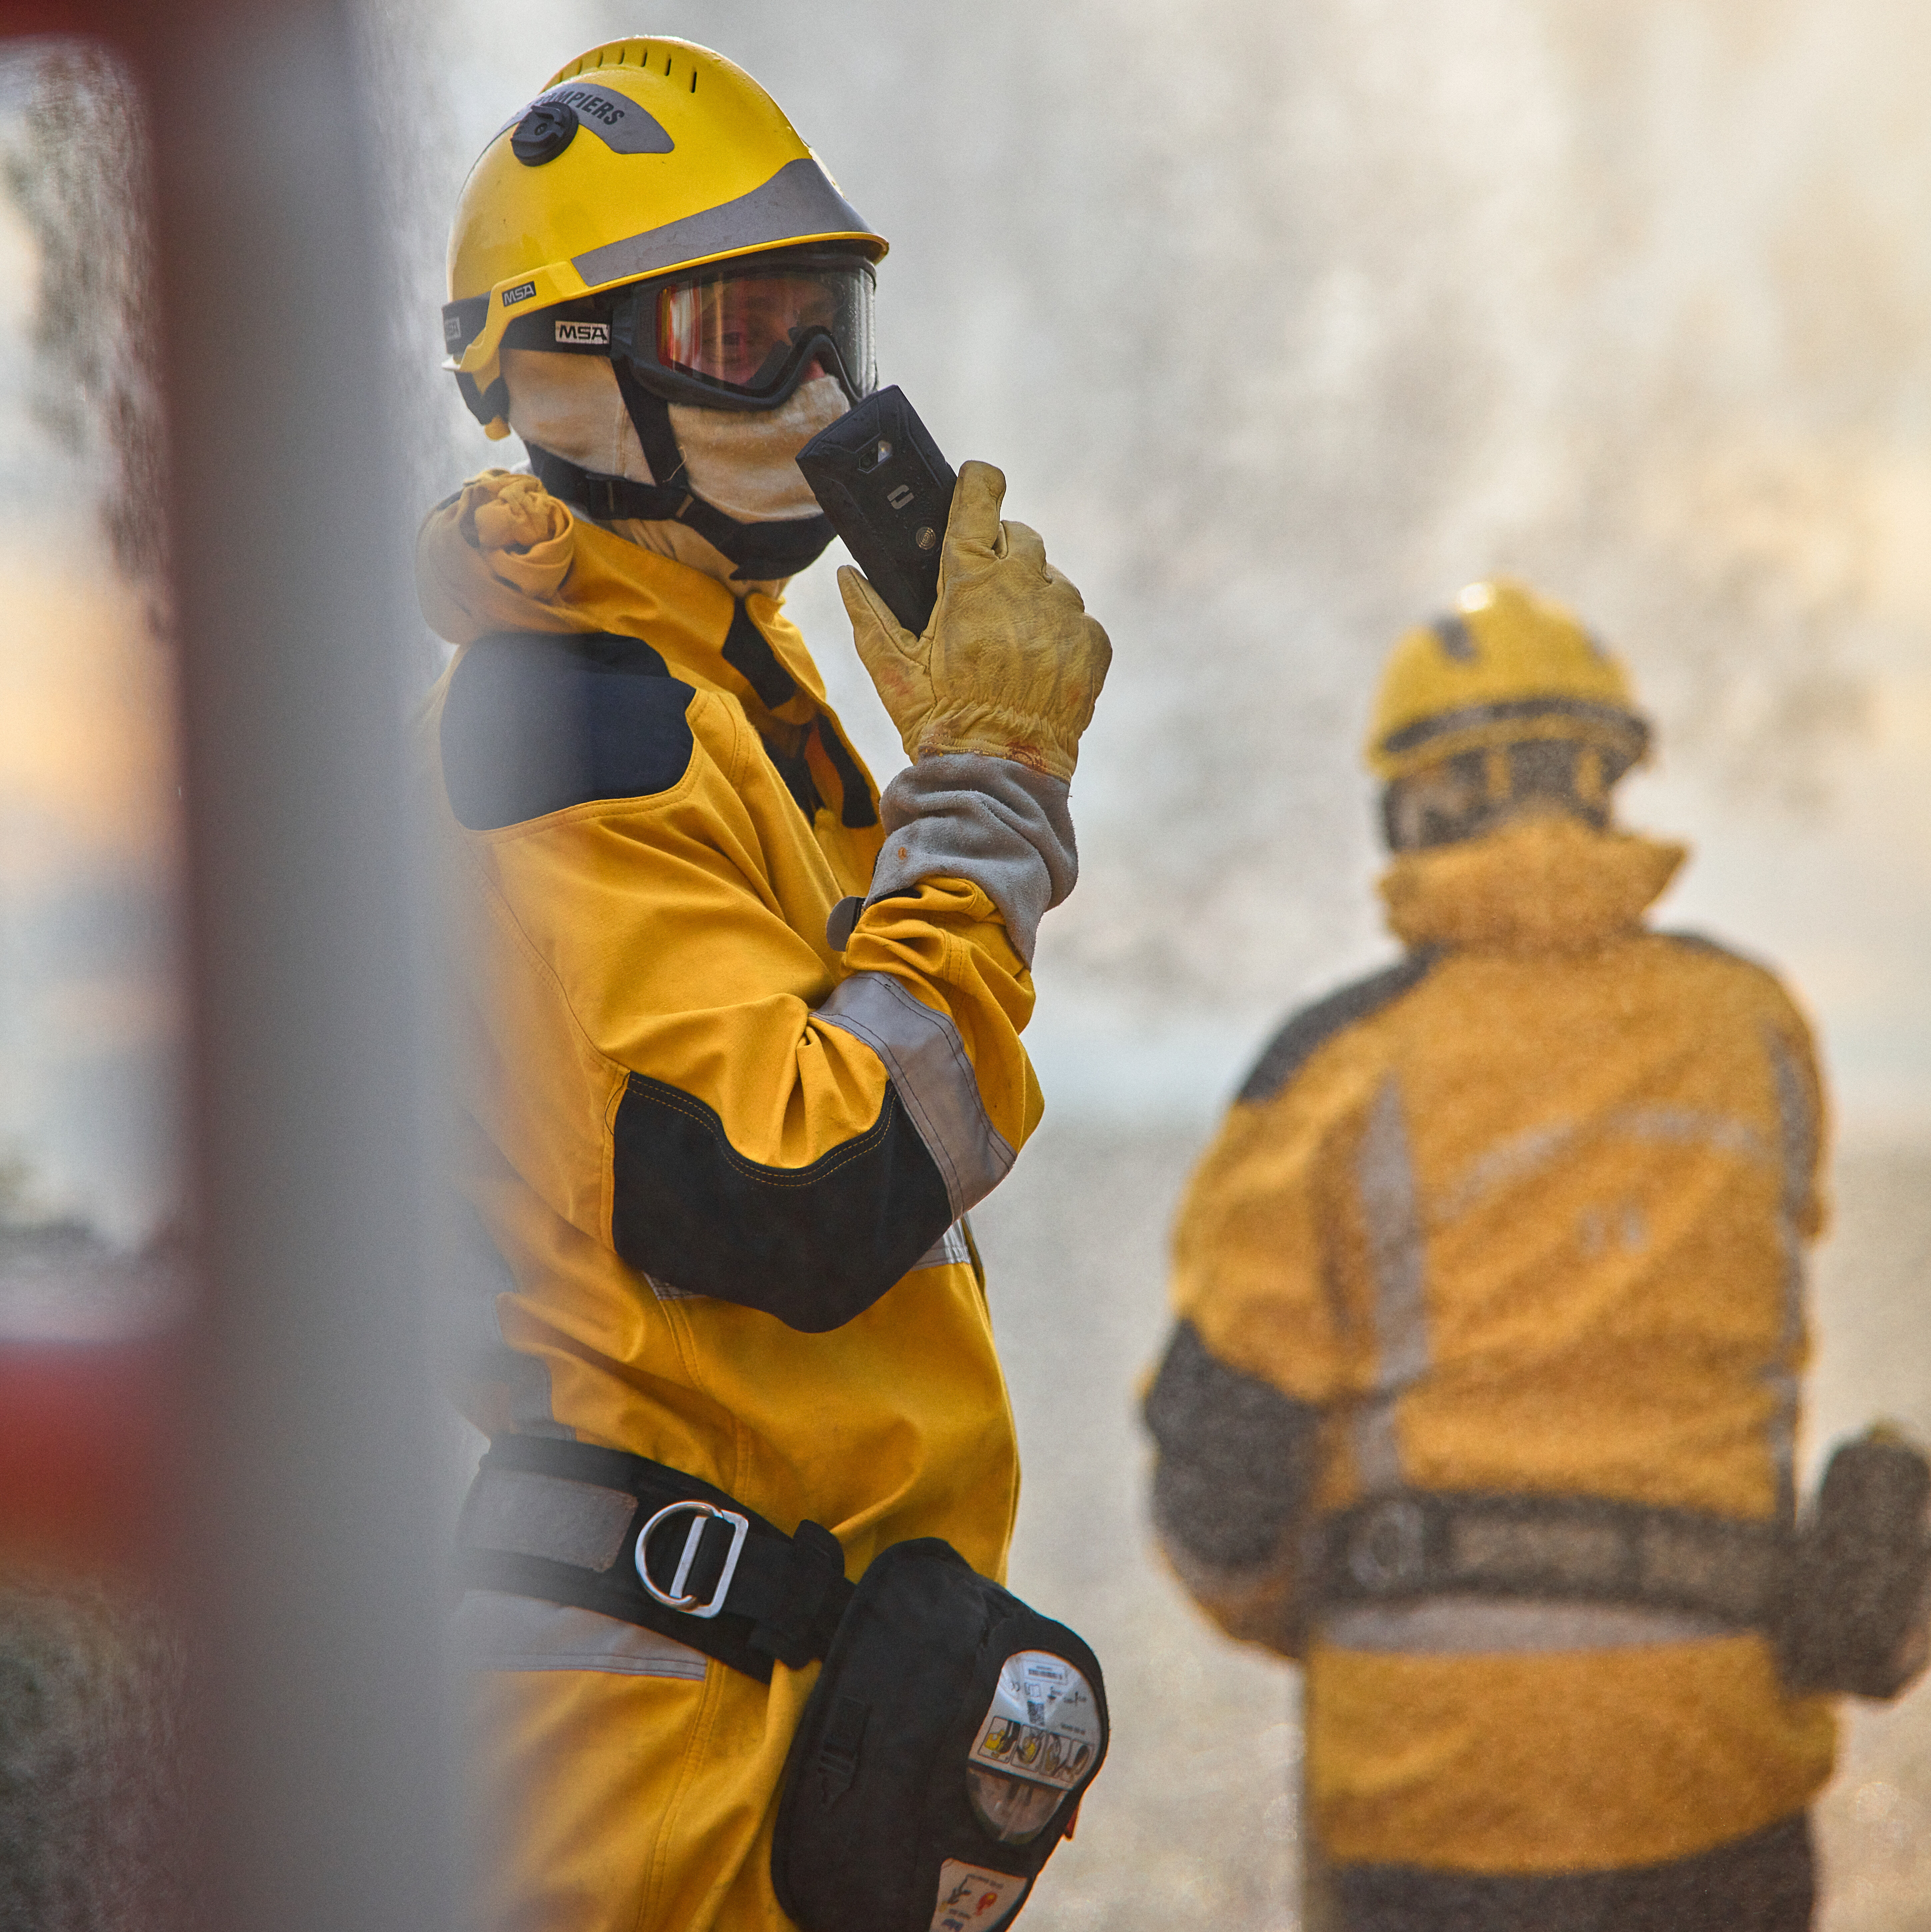 firefighters with crosscall smartphone